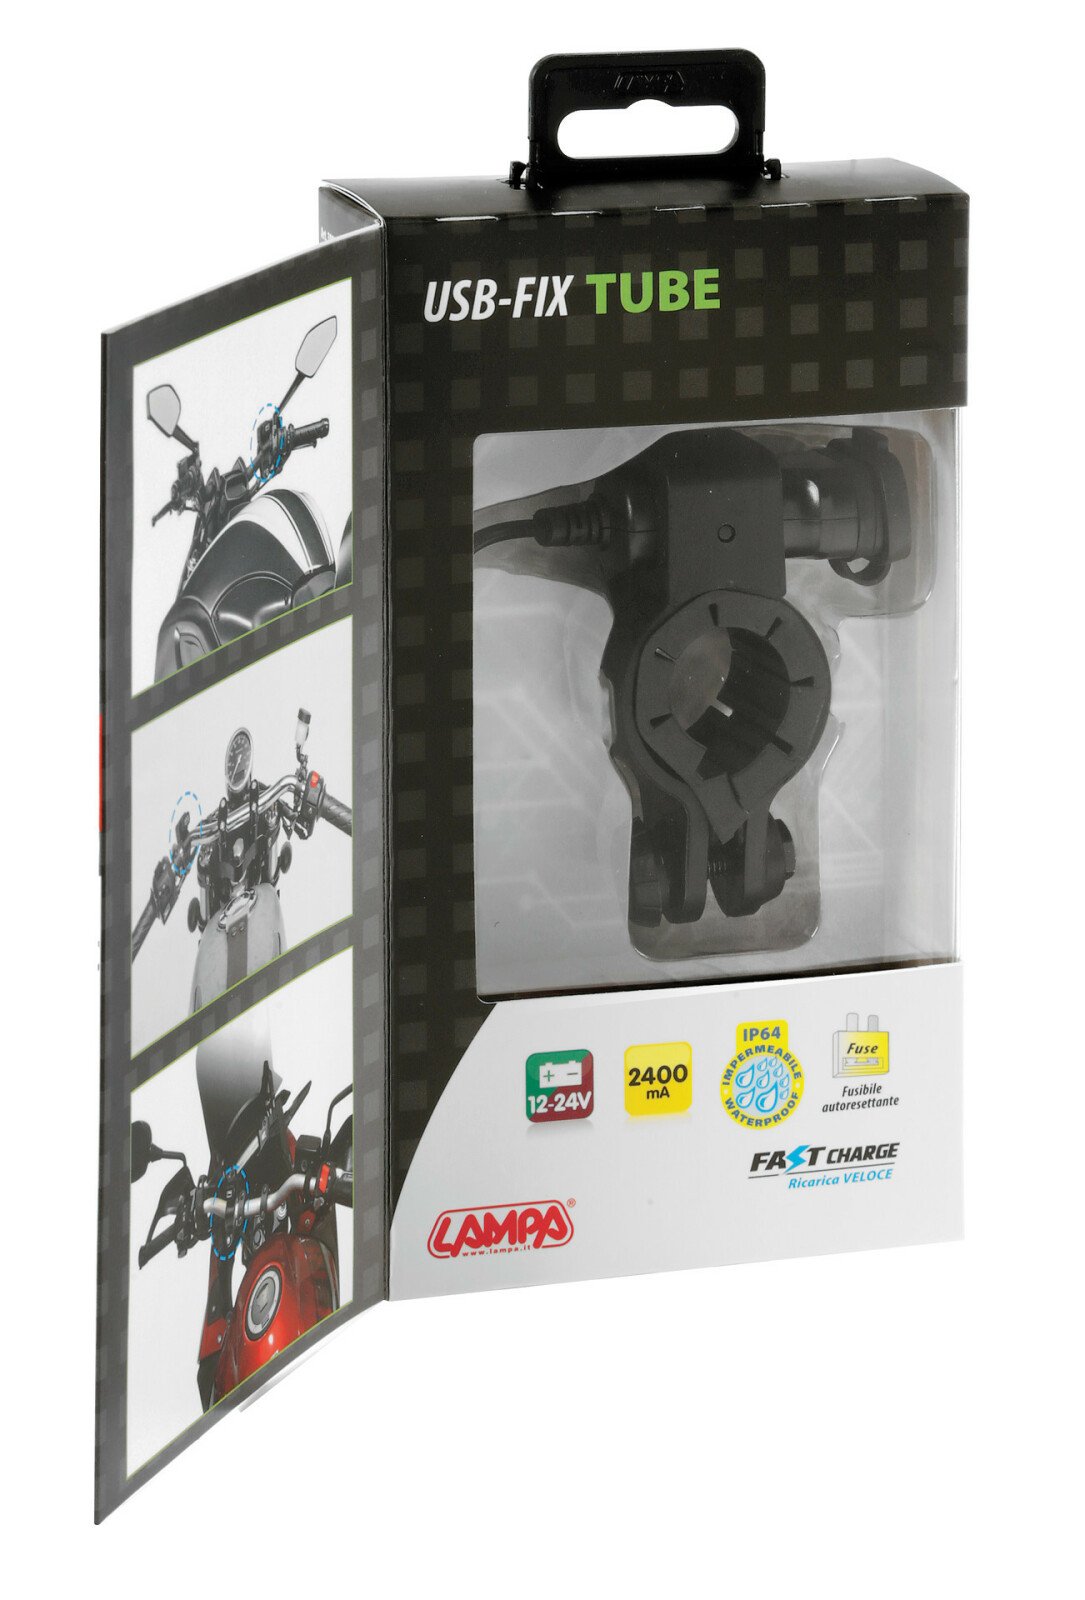 Usb-Fix Tube, Usb charger with handlebar fixing and fork connectors - Fast Charge - 3000 mA - 12/24V thumb